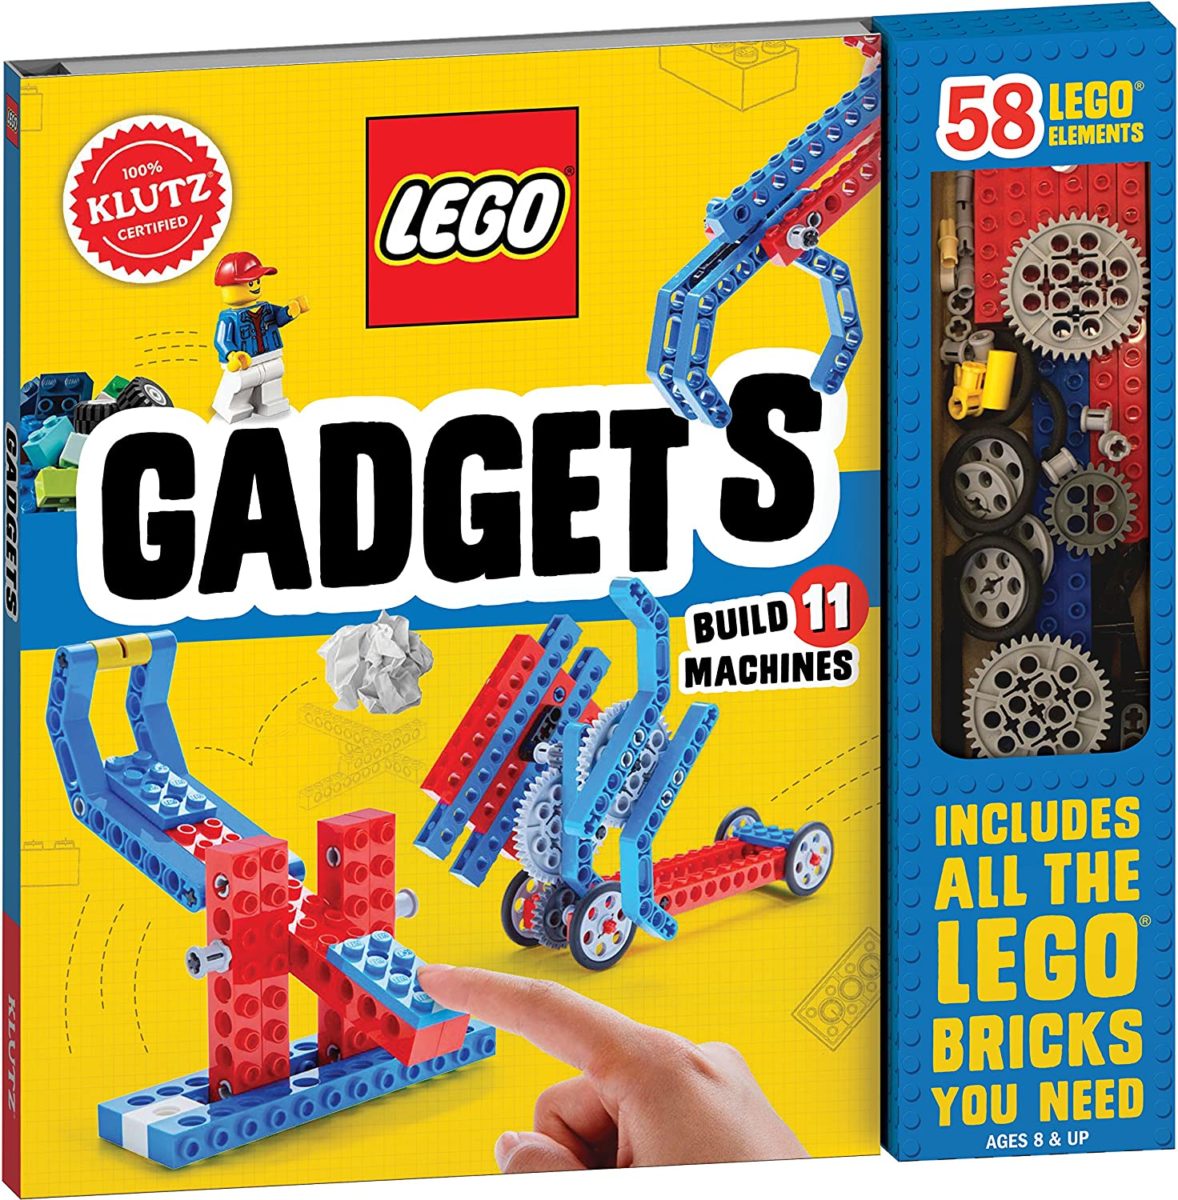 Klutz Lego Gadgets Science _ Activity Kit - Top Toys and Gifts for Nine Year Old Boys 1